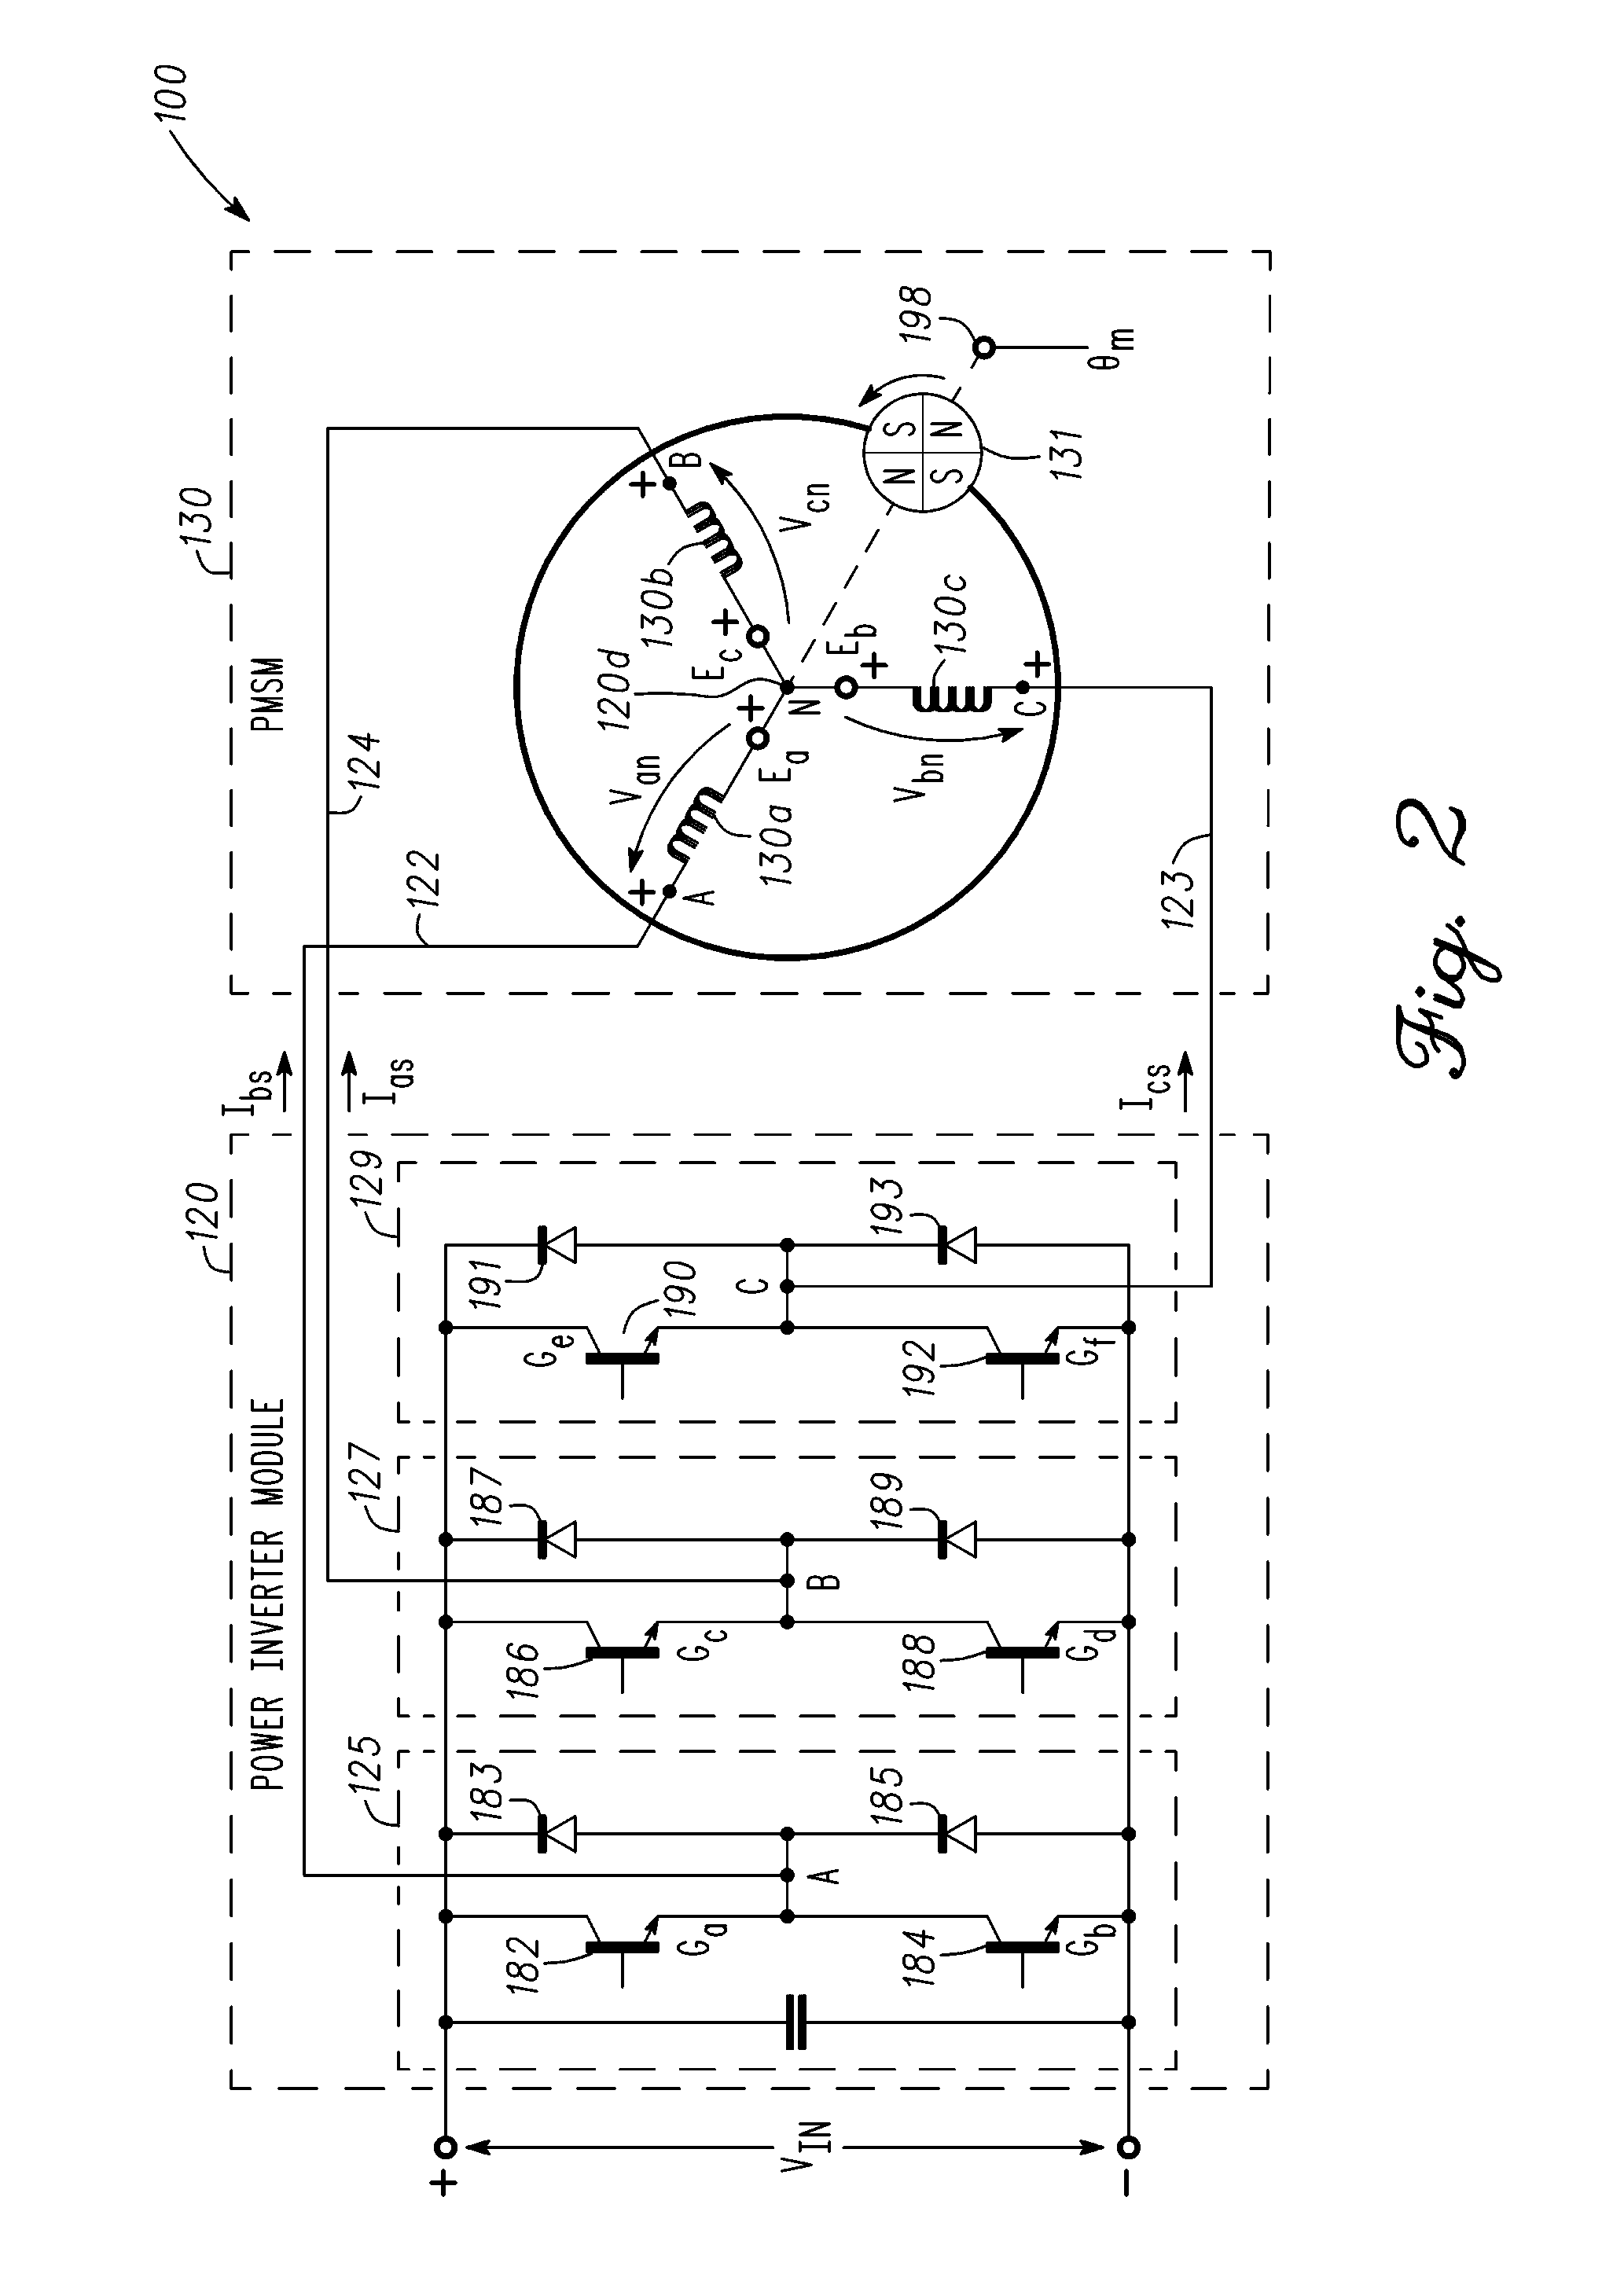 Methods, systems and apparatus for dynamically controlling an electric motor that drives an oil pump